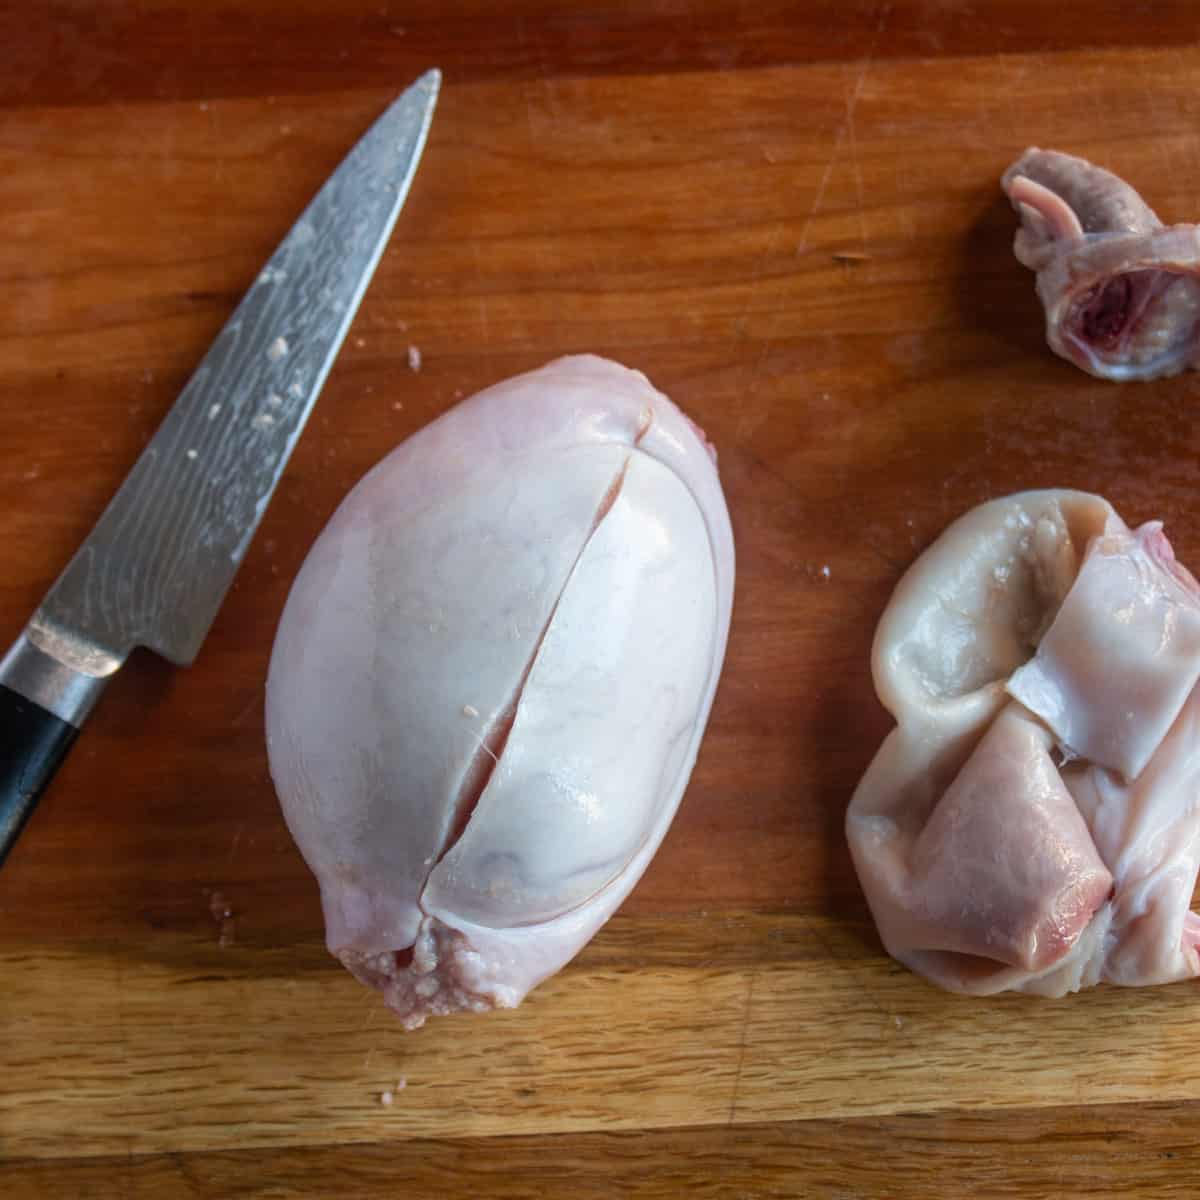 How to clean and cook testicles, lamb fries, or rocky mountain oysters